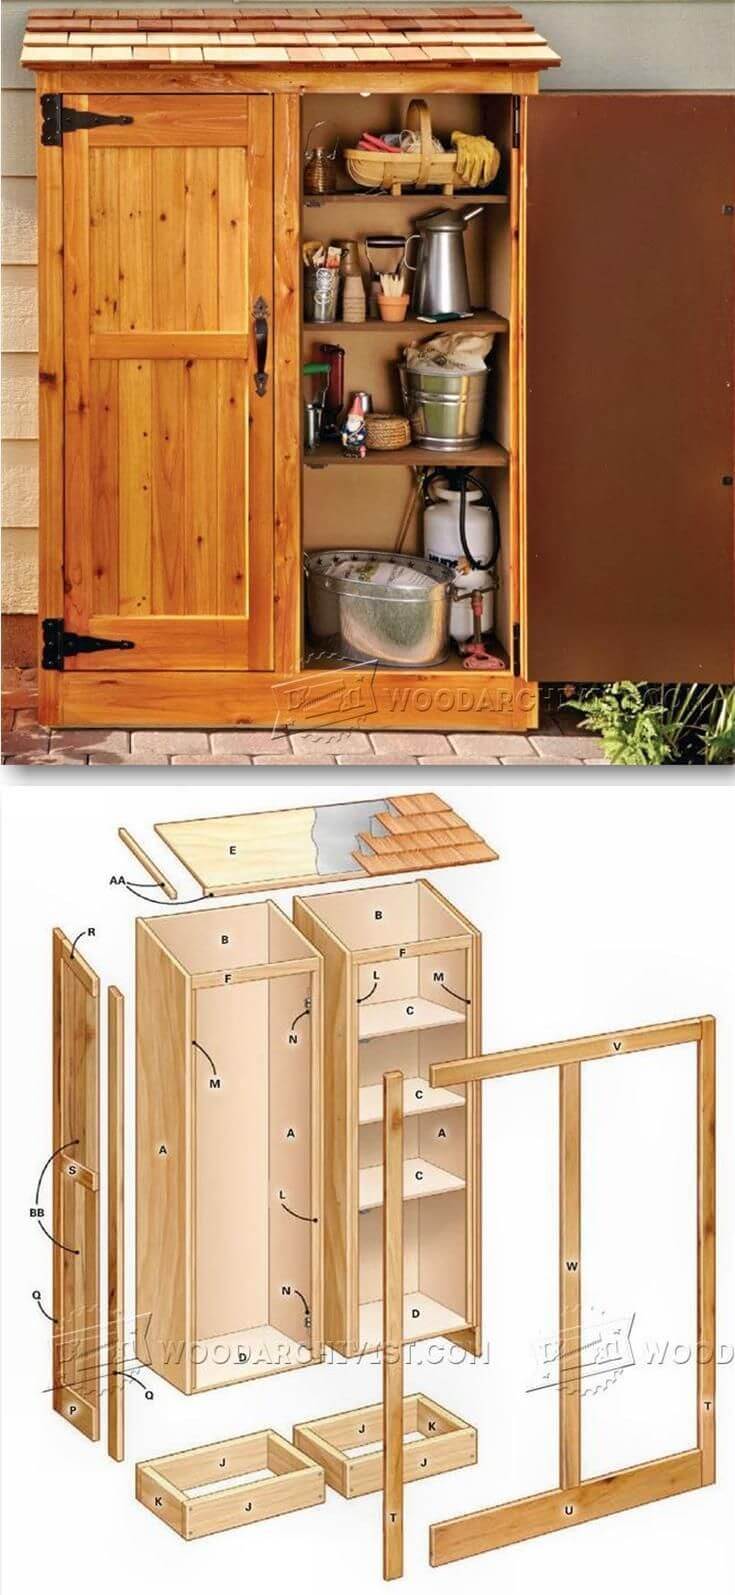 A Wooden Storage Cabinet with Shelves